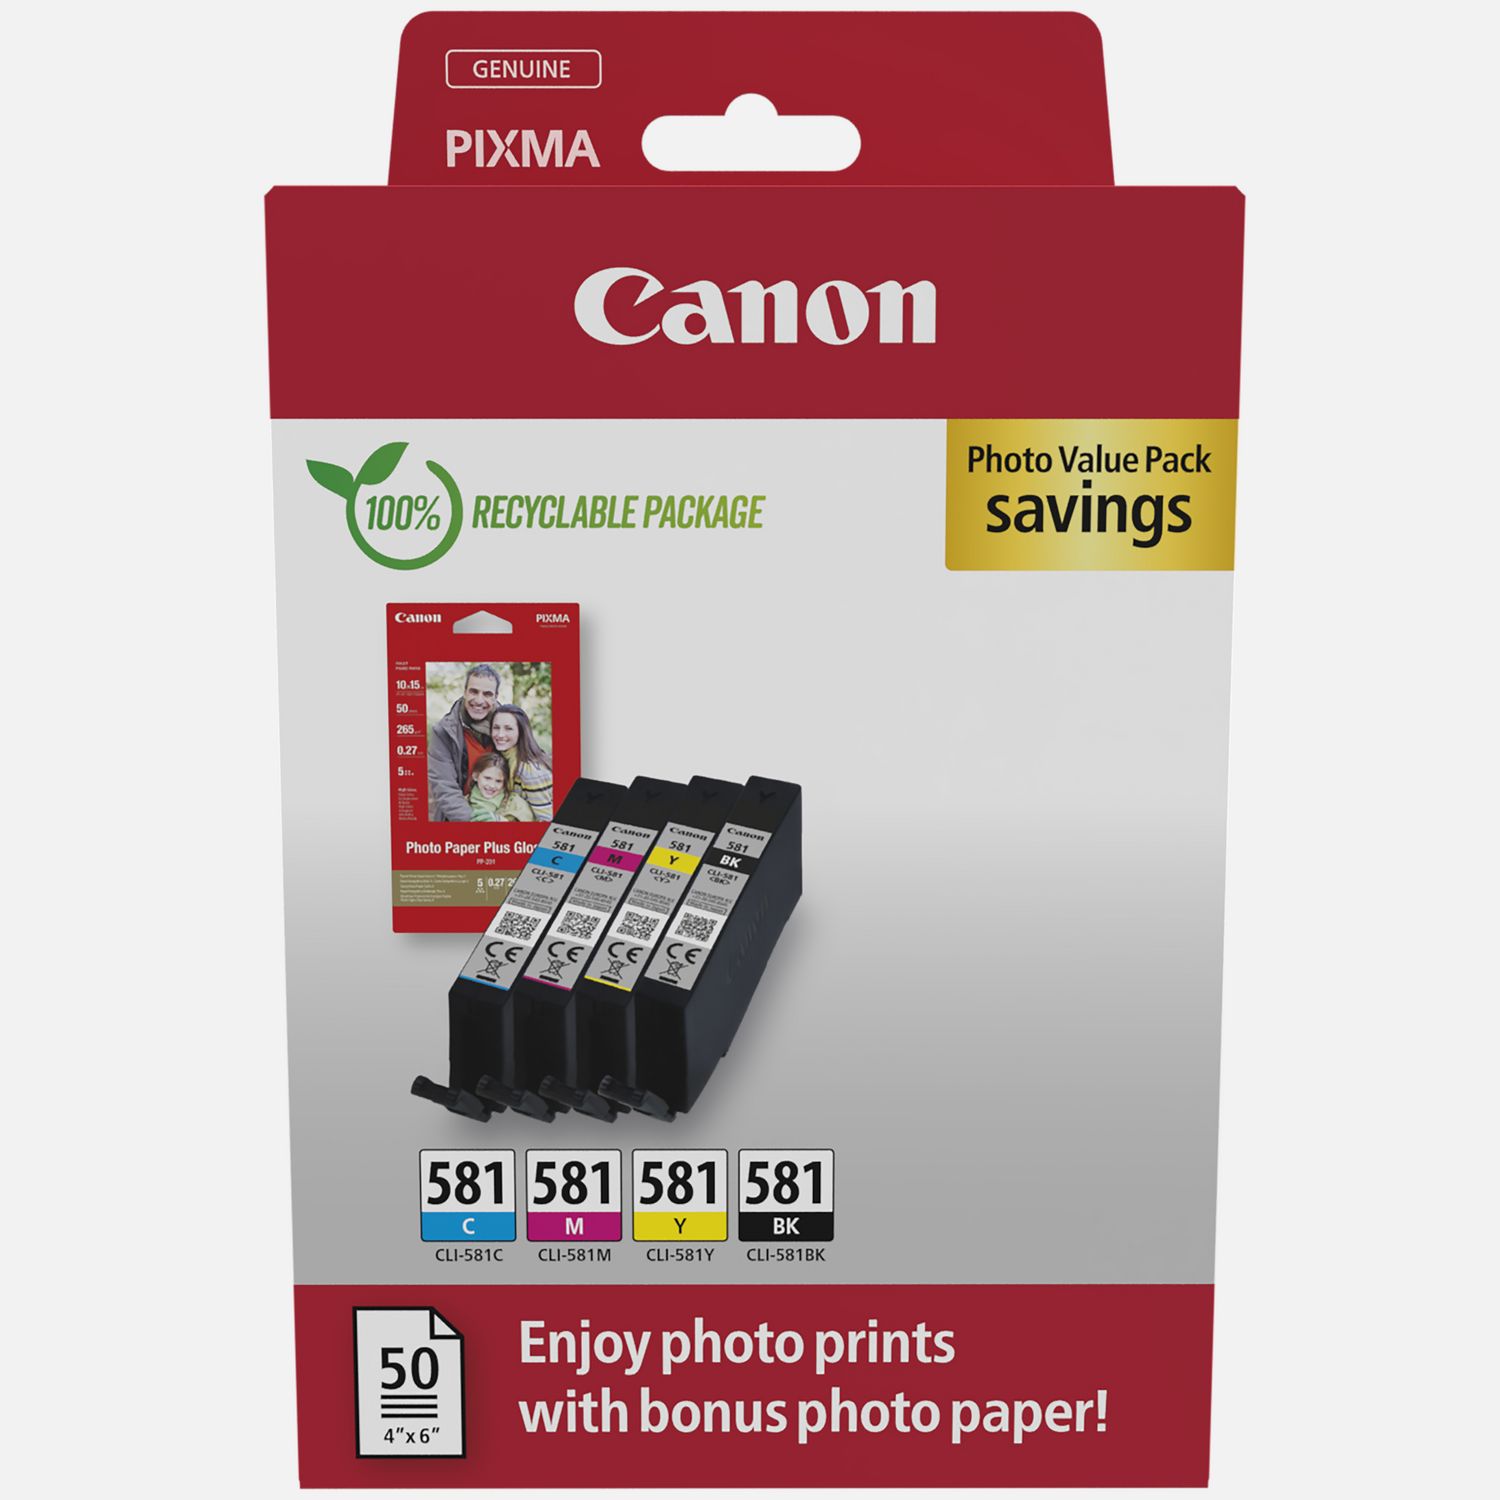 https://i1.adis.ws/i/canon/2106C006_581%20Photo%20Value%20Pack%20Cardboard%20Pack%20FRT/canon-cli-581-bk-c-m-y-ink-cartridge-photo-paper-value-pack-product-package-front-view?w=1500&bg=gray95